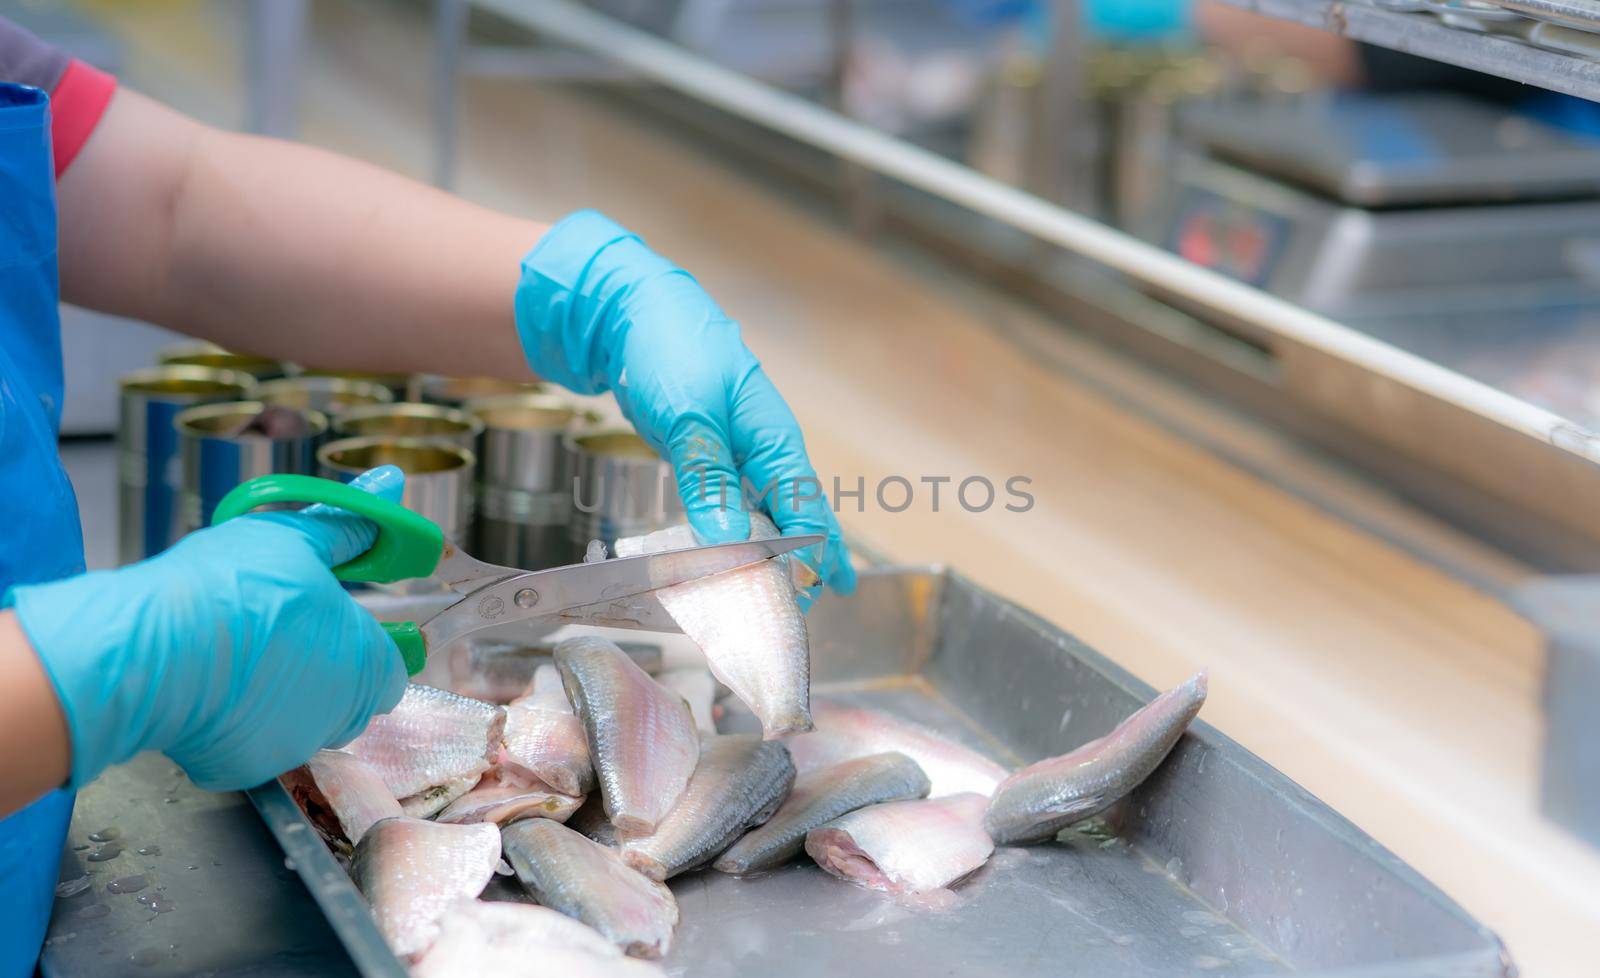 Worker working in a canned food factory. Food industry. Canned fish factory. Worker's hand cutting sardine to fill in cans. Worker in food processing production line. Food manufacturing industry.